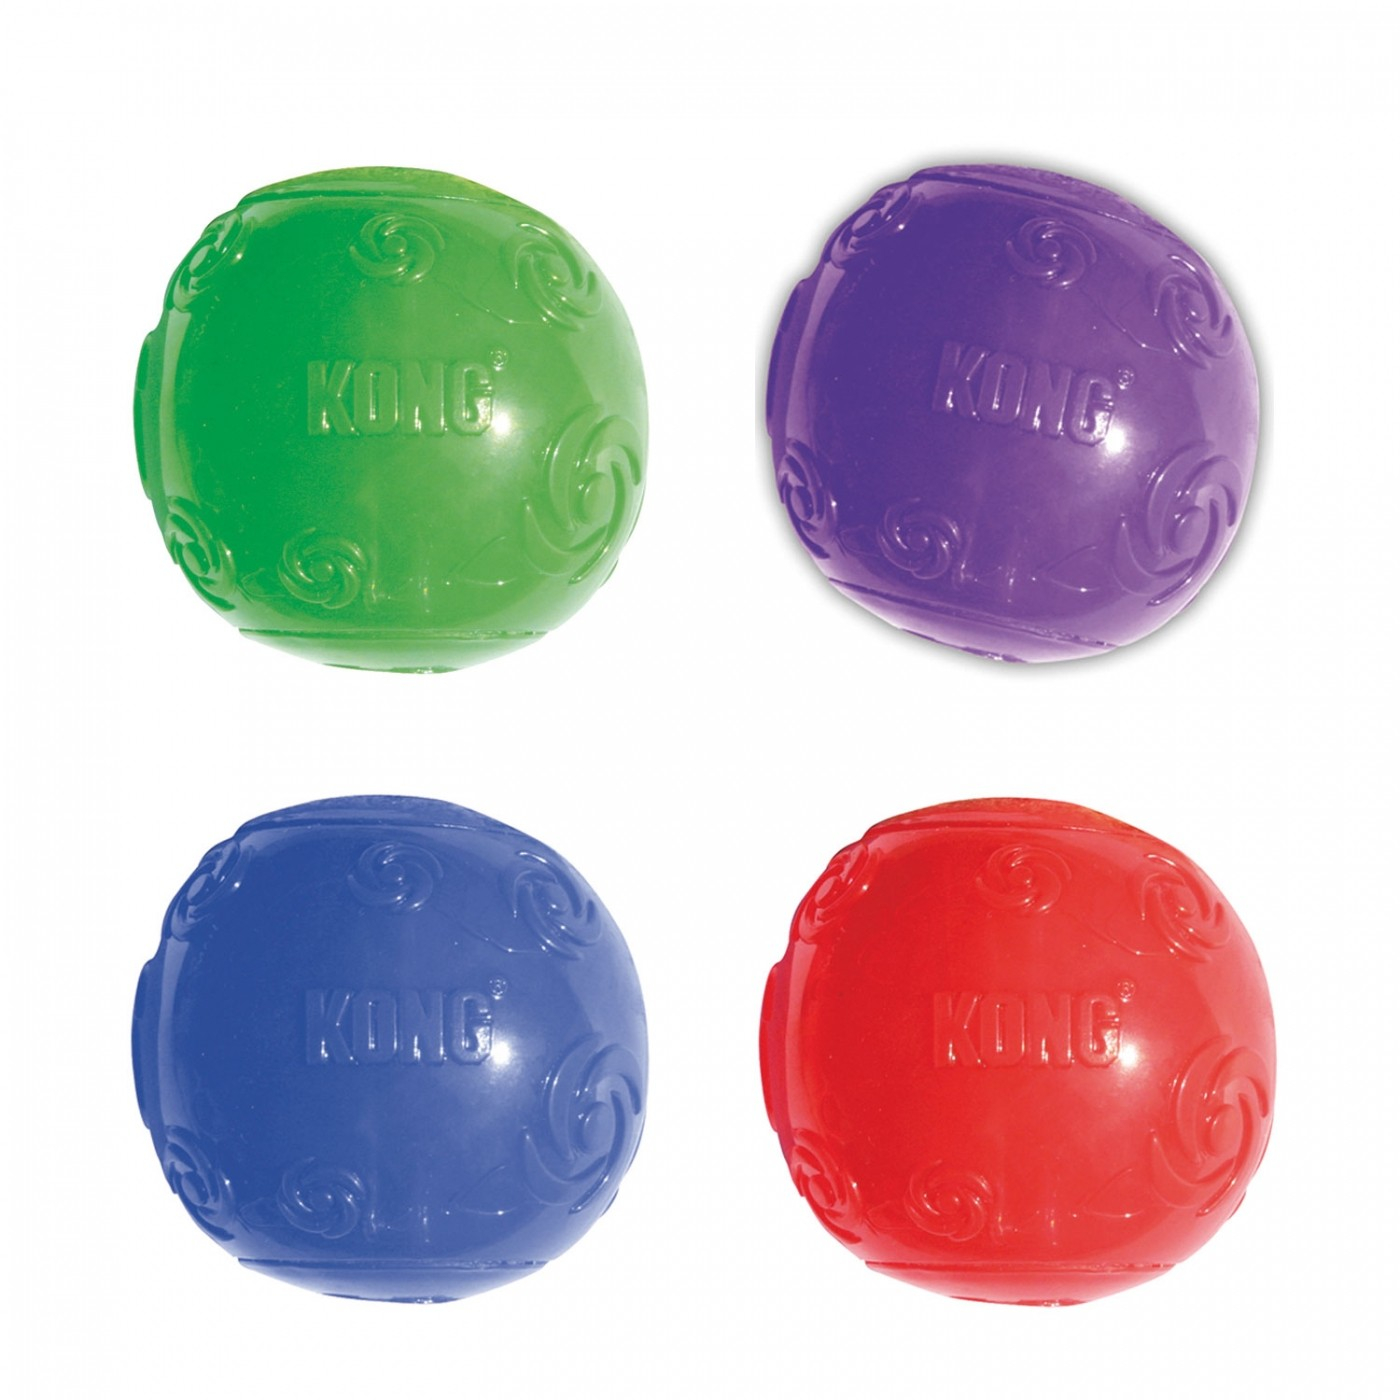 KONG Squeezz Ball Spielzeug